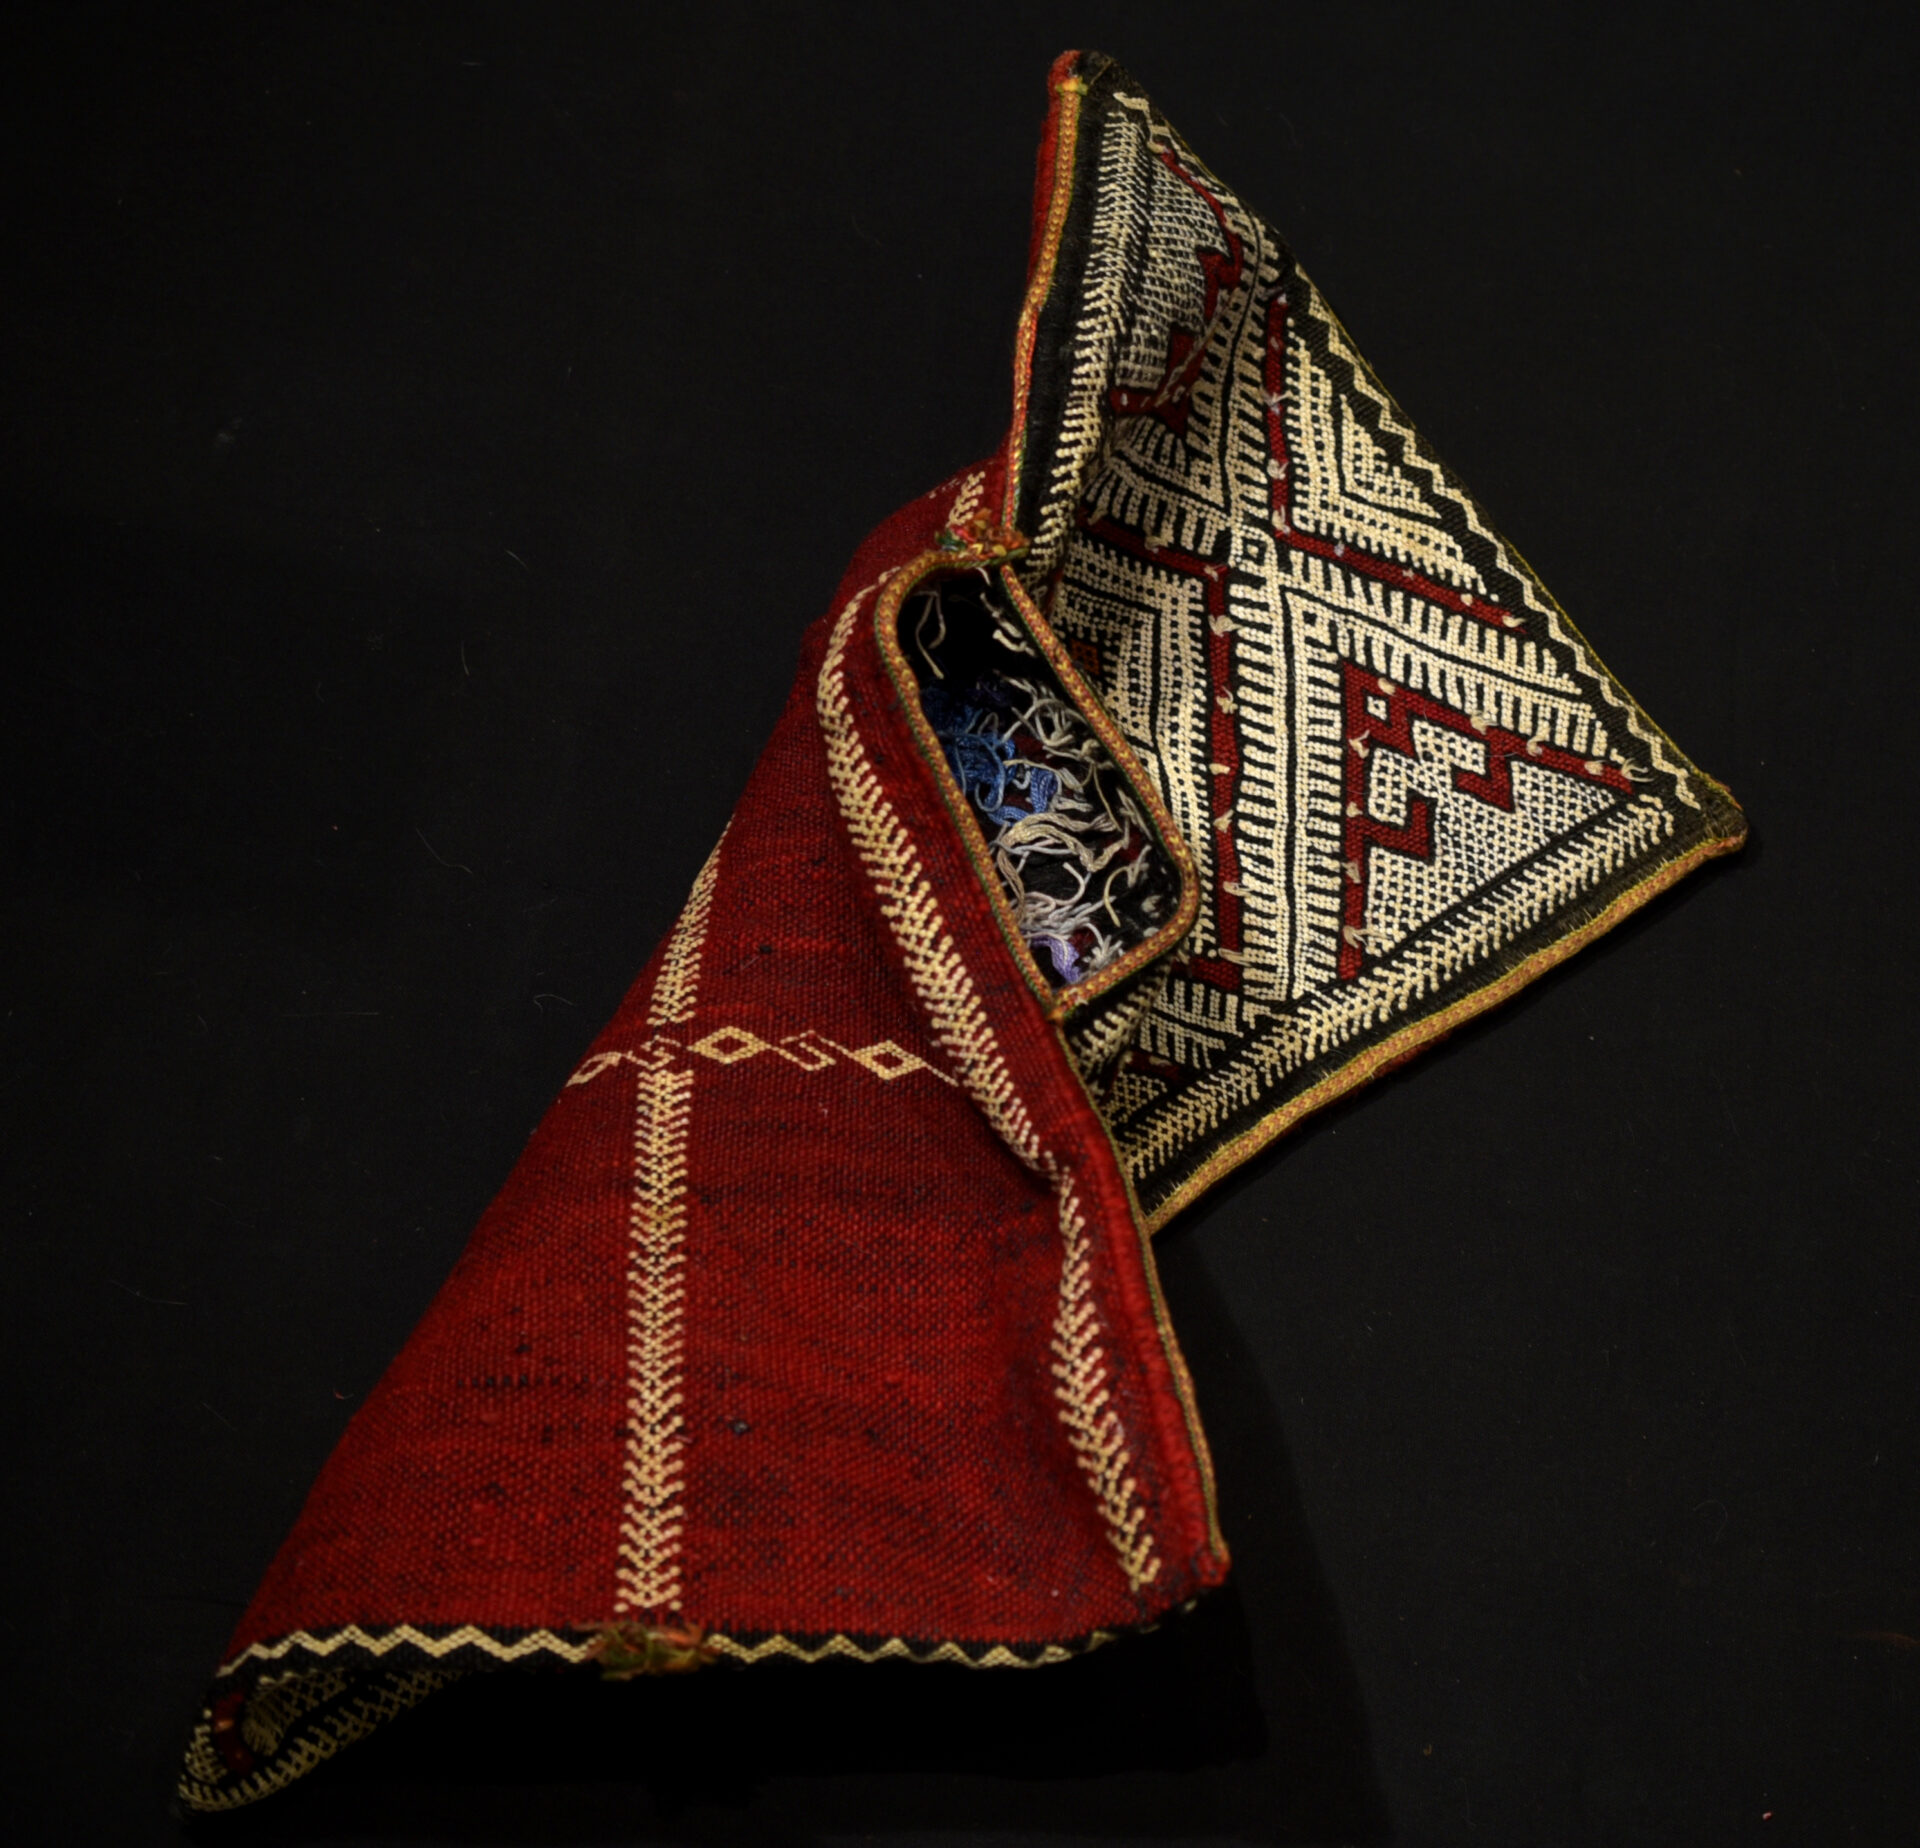 Old Fine Berber Pillow – Zemmour Tribe – Middle Atlas, Morocco